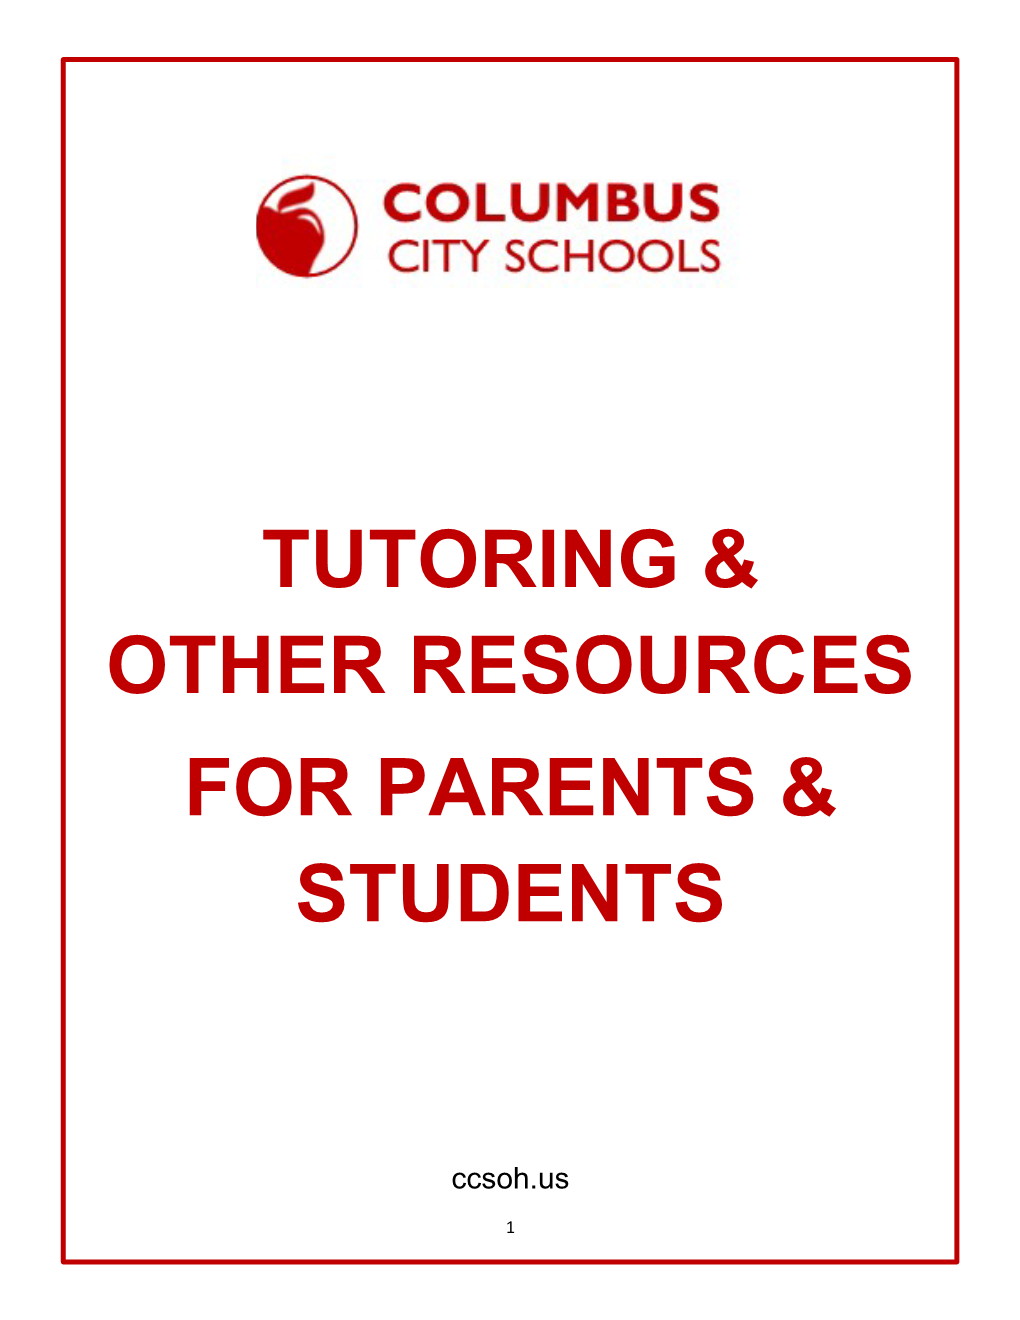 Tutoring & Other Resources for Parents & Students